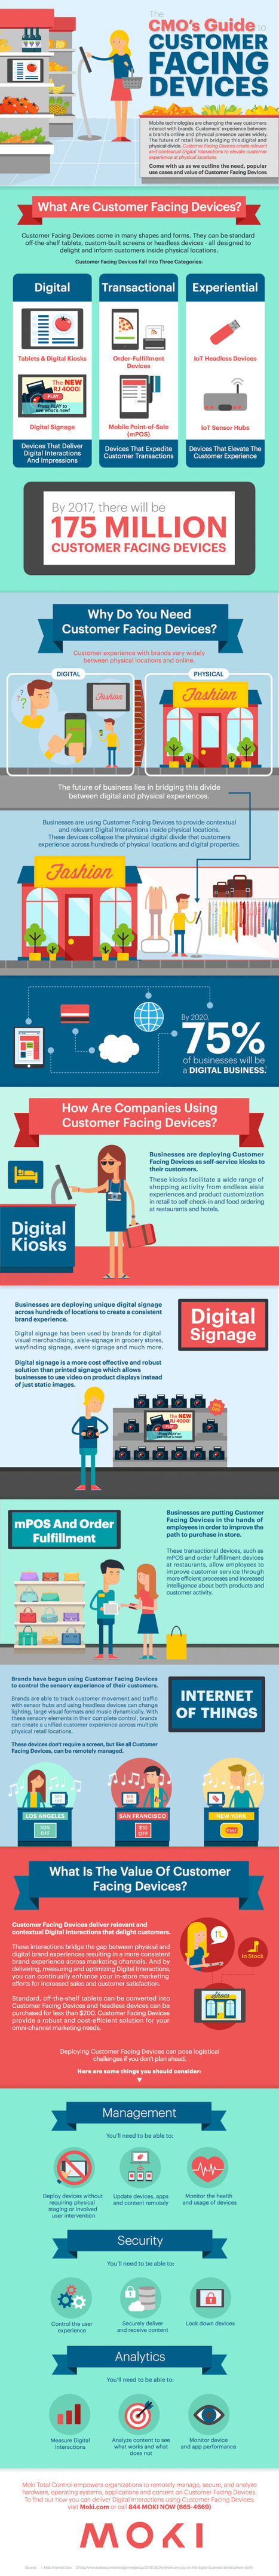 Customer Facing Devices and How You Can Market with Them #infographic | MarketingHits | Scoop.it